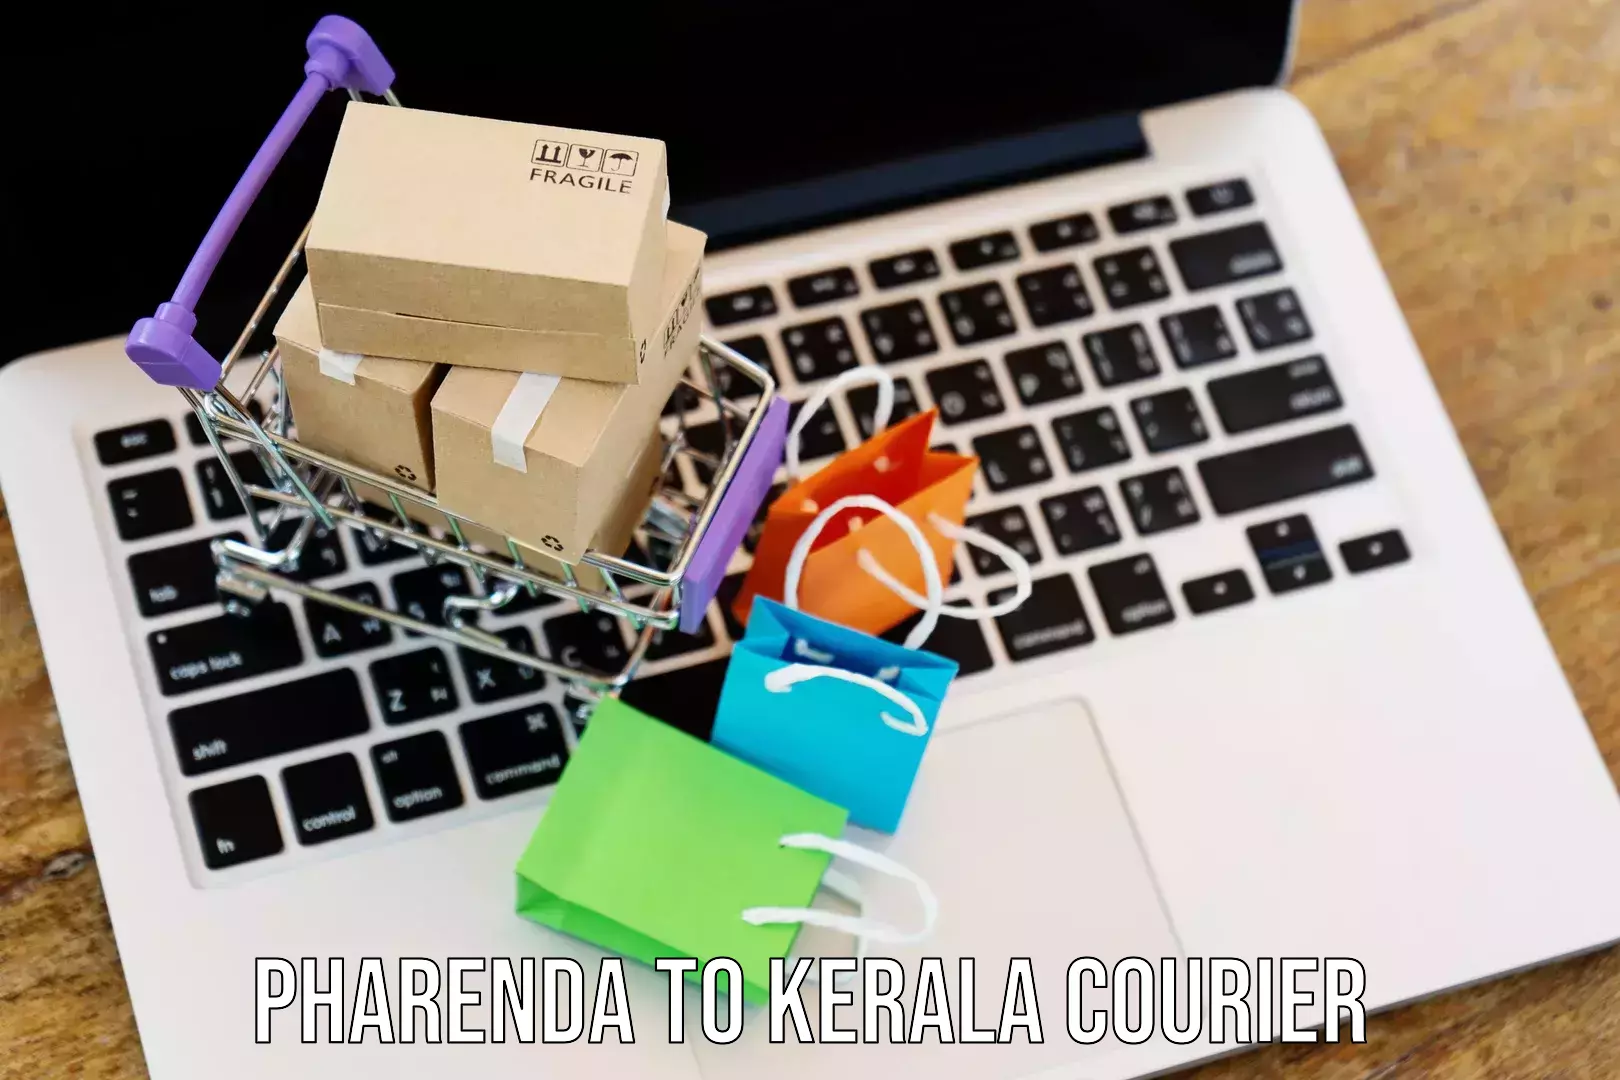 Multi-national courier services Pharenda to Kerala